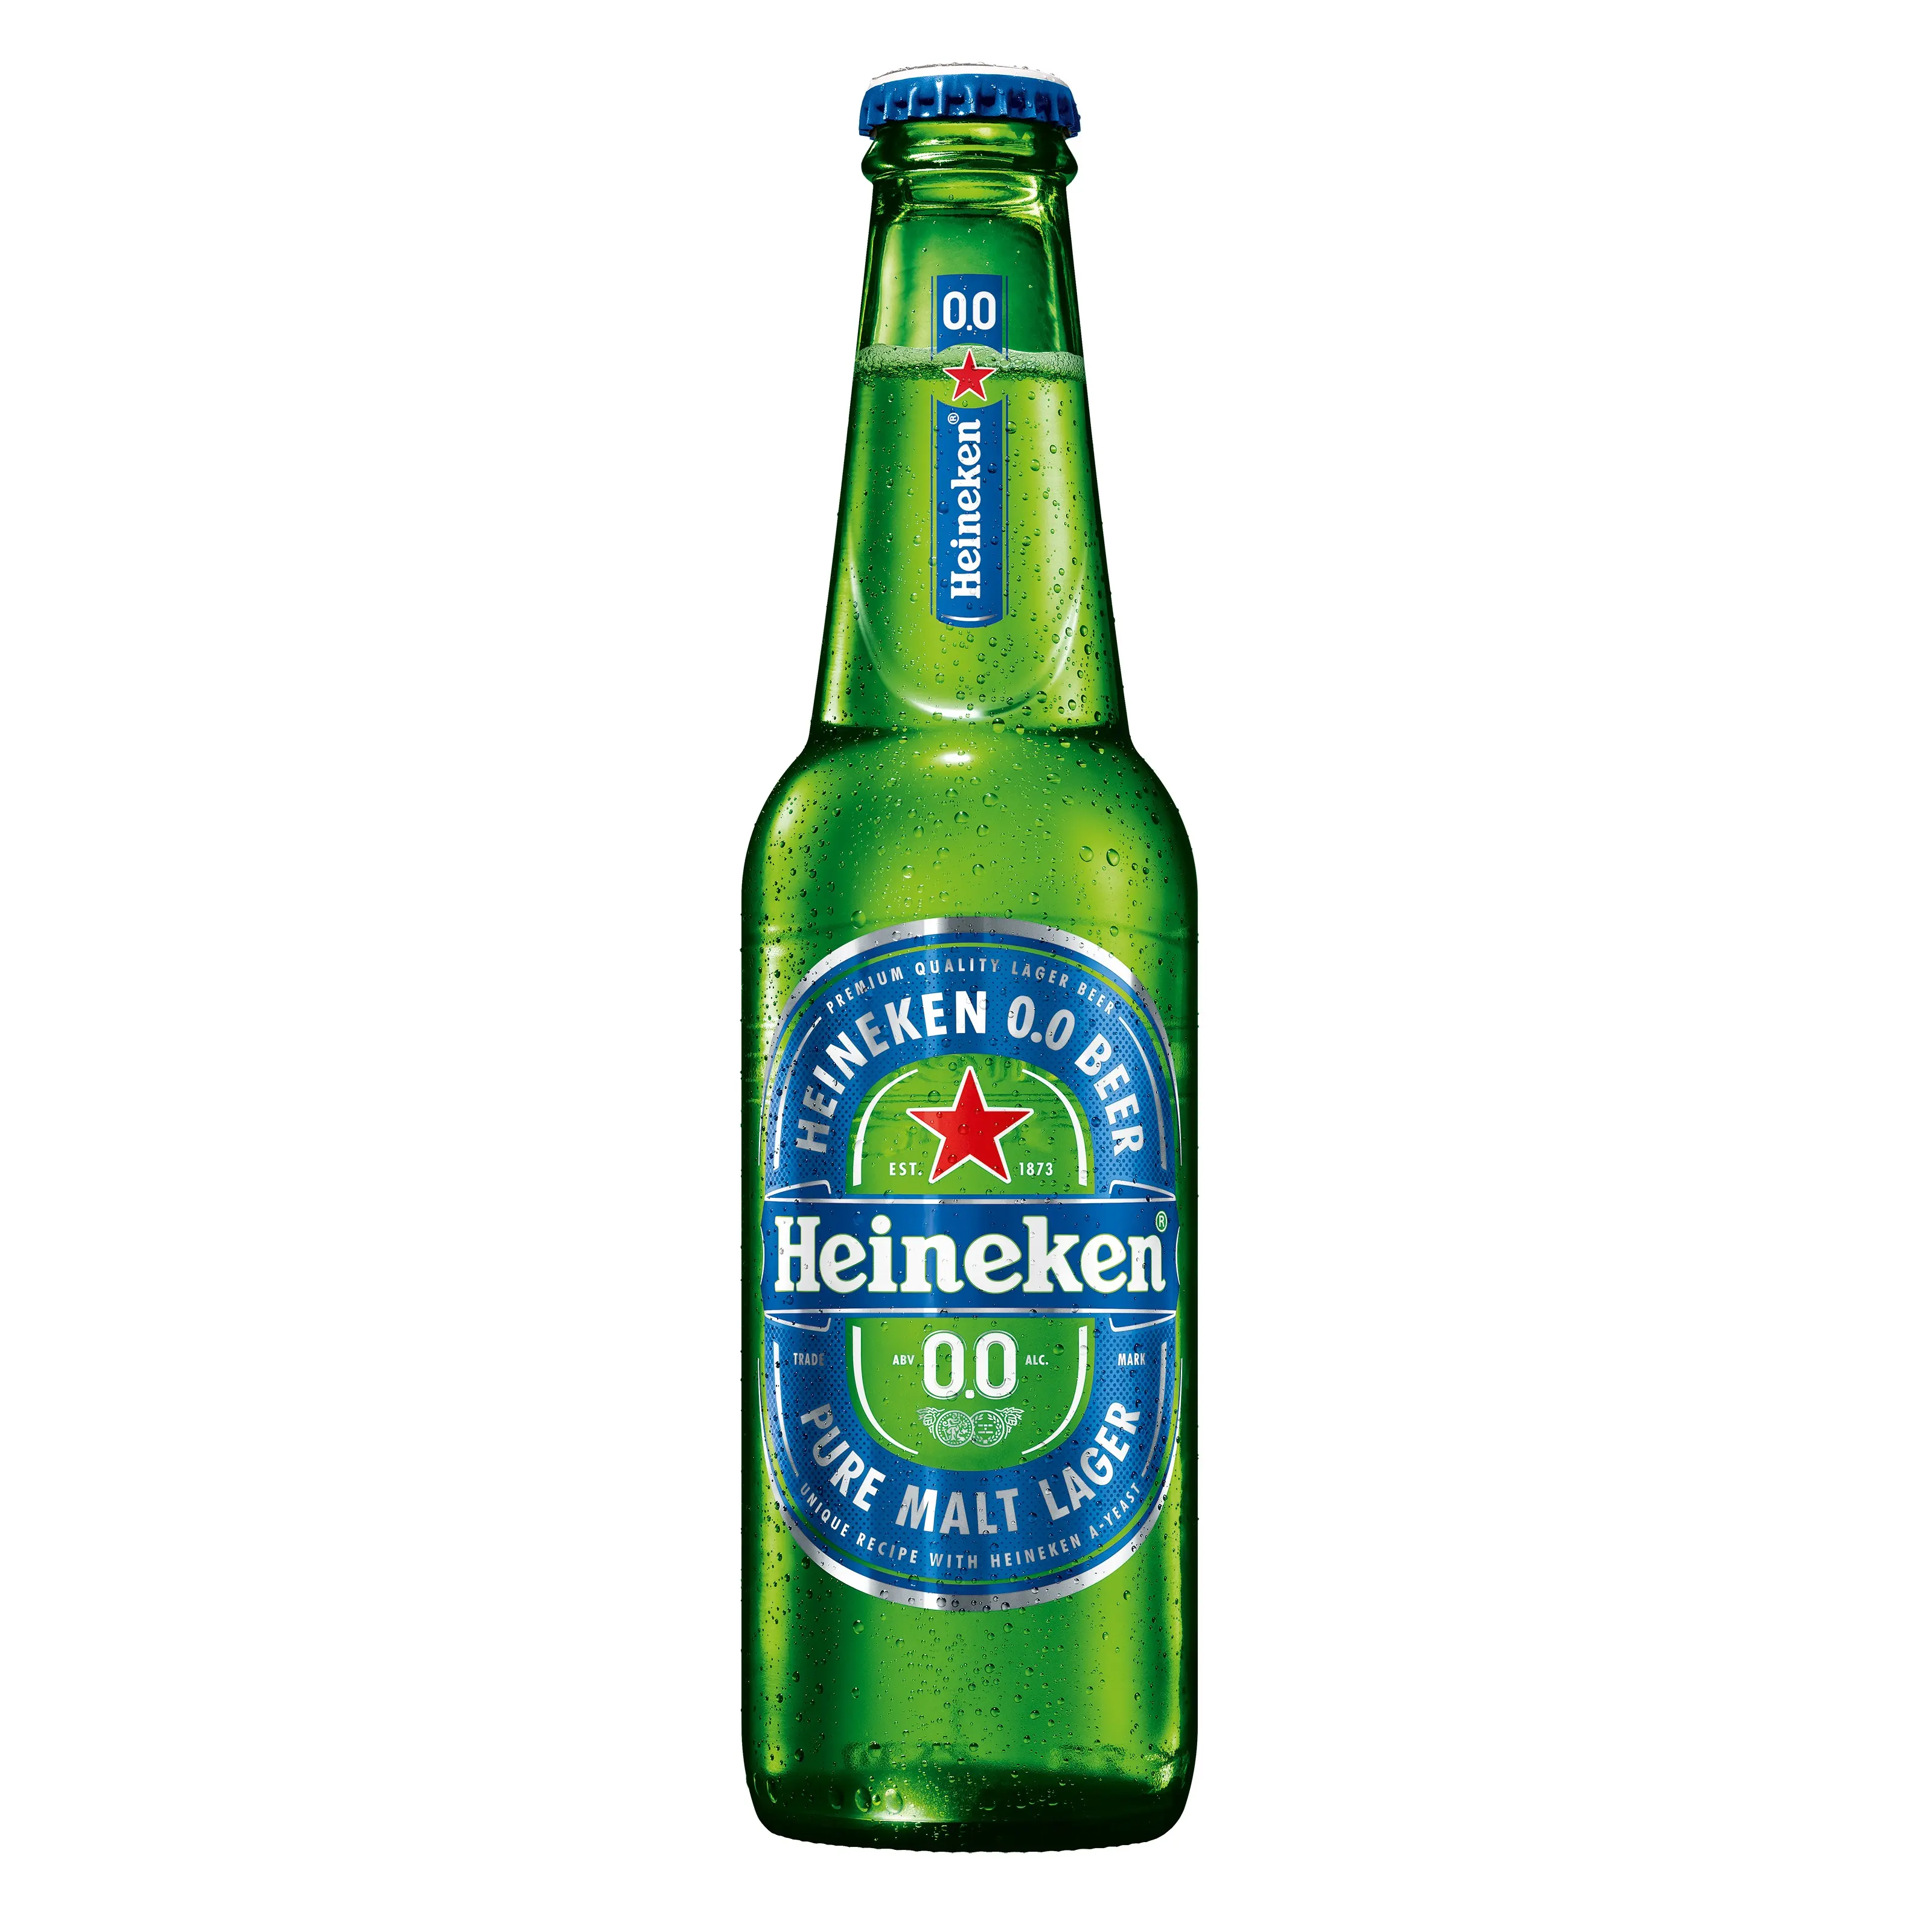 Heinekens Larger Beer in Bottles in 250ml (All Text Available)